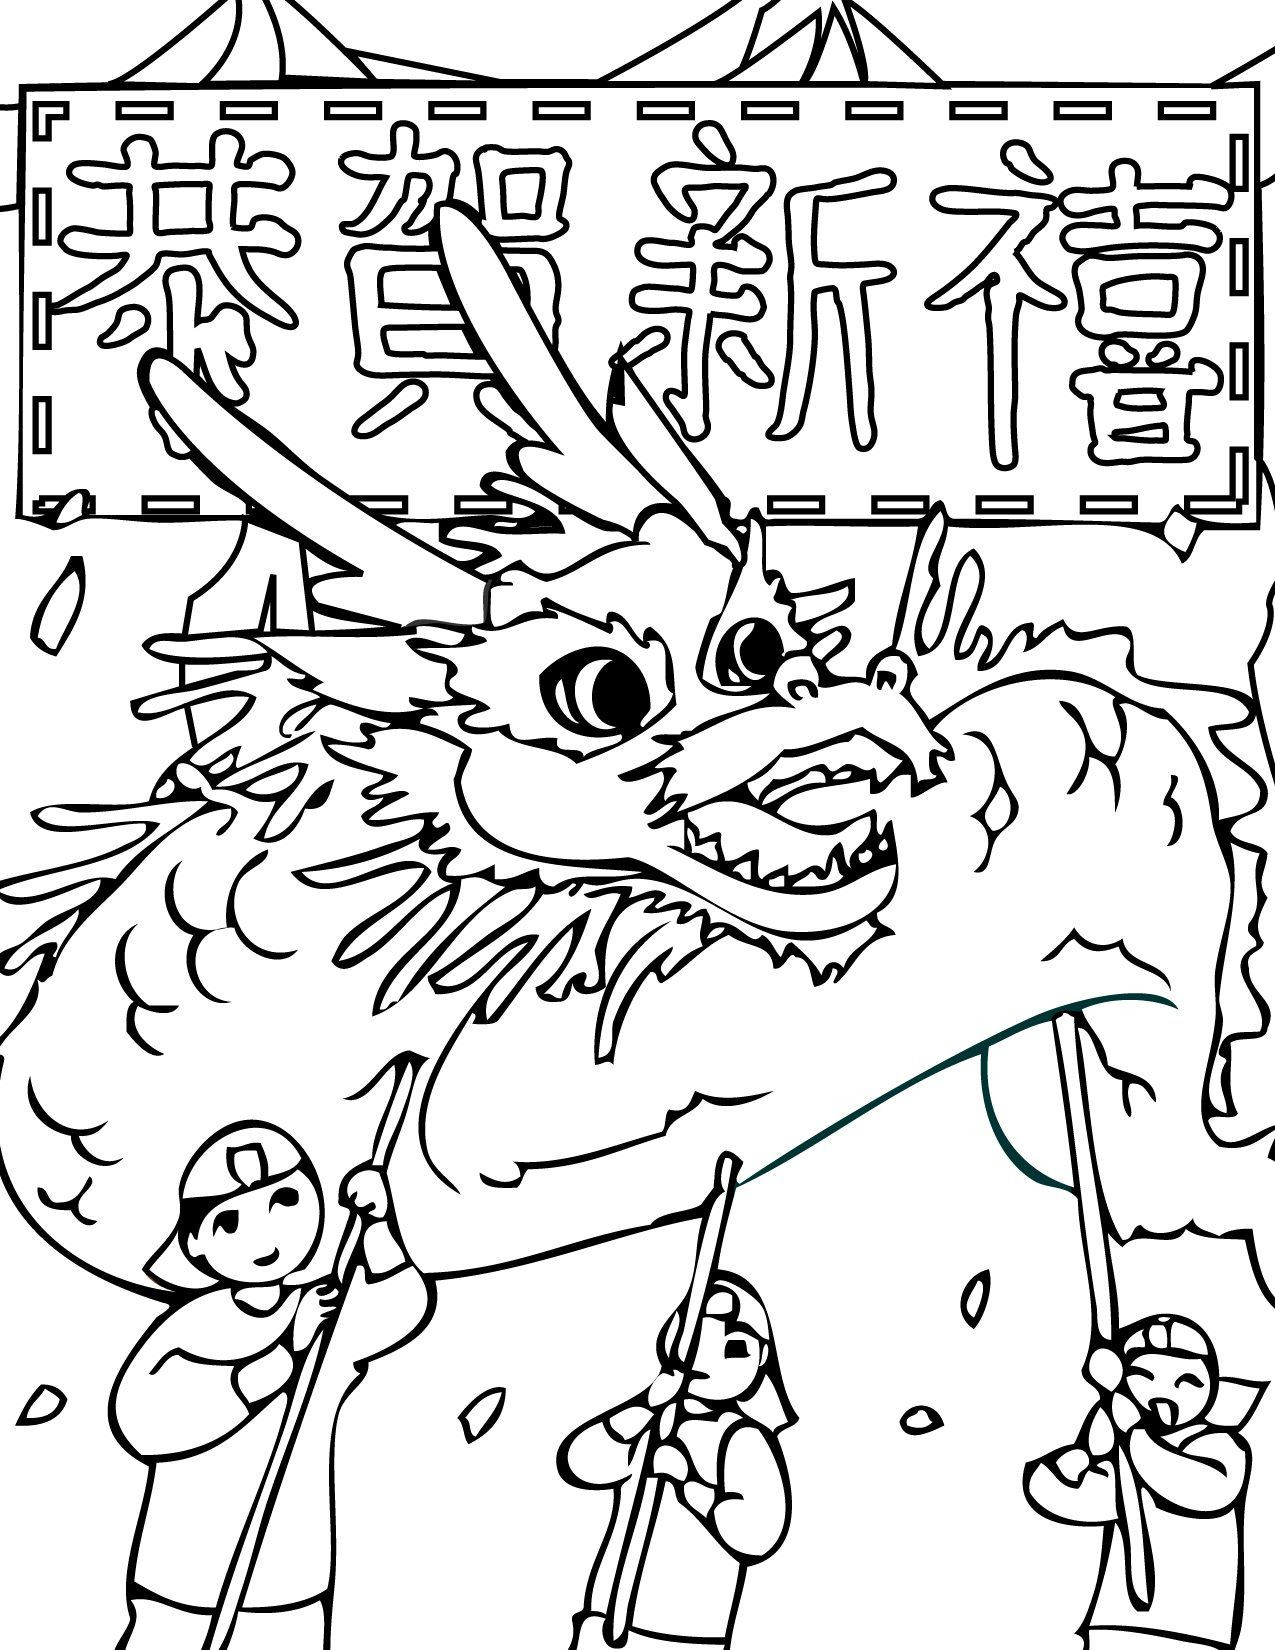 Chinese New Years Coloring Pages
 Chinese New Year Coloring Pages Best Coloring Pages For Kids